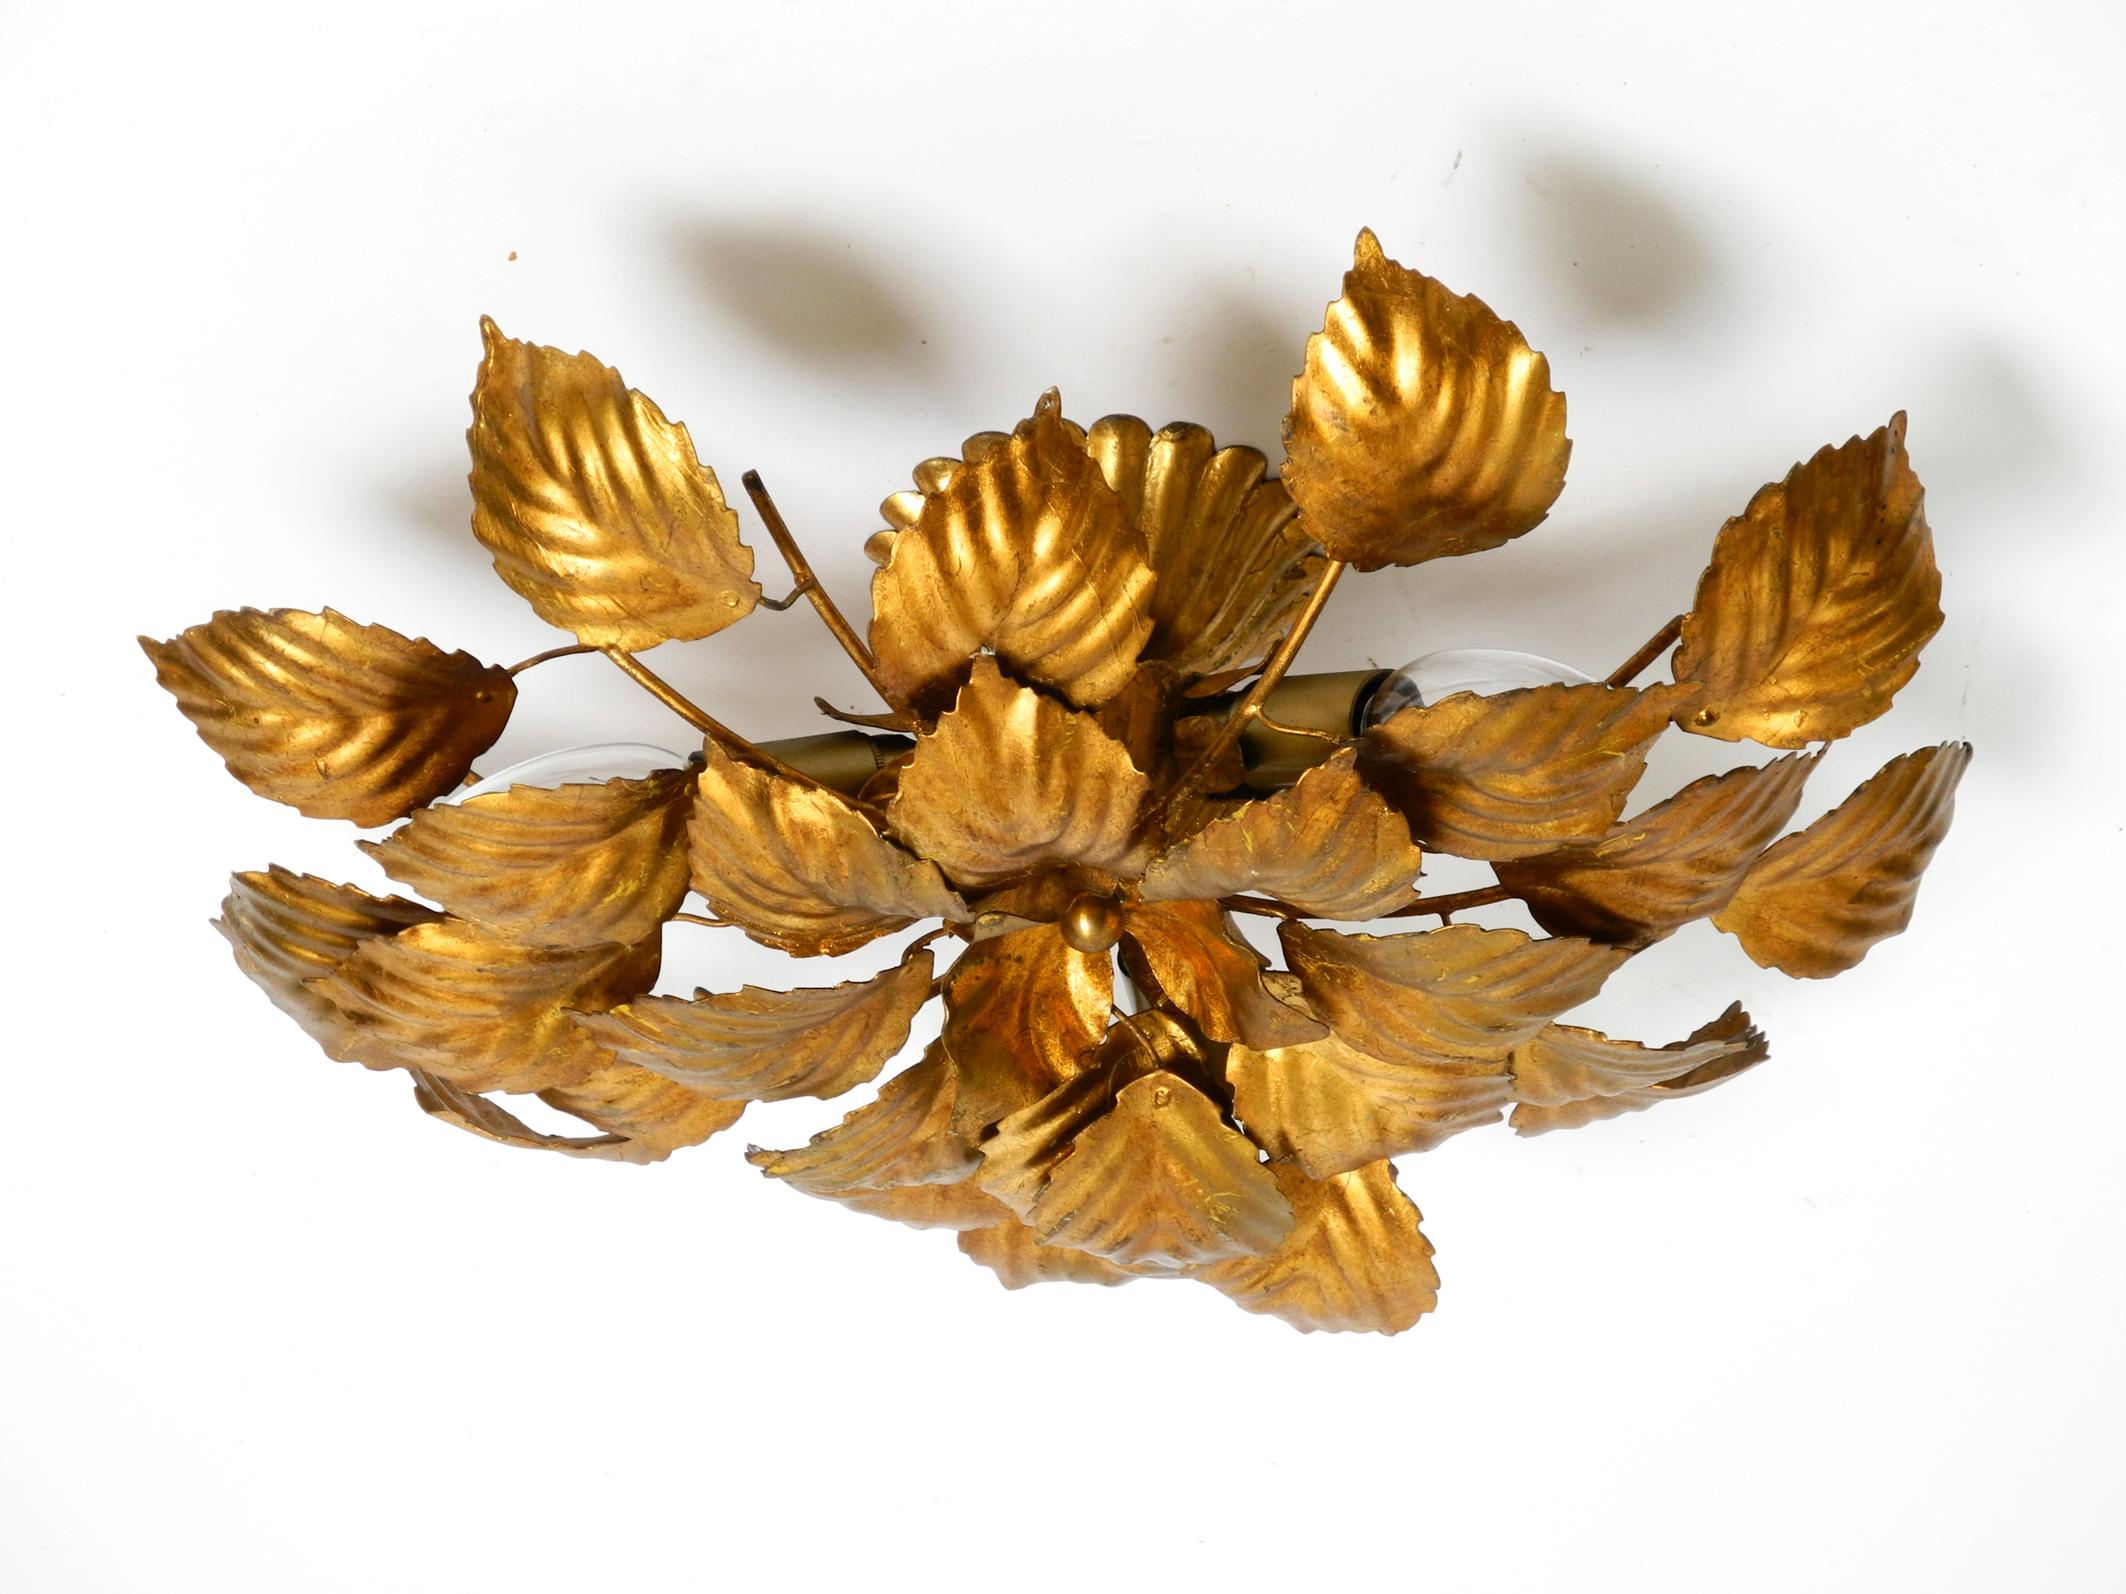 Beautiful 1980s gold plated floral Hollywood Regency ceiling lamp with large leaves.
Very elegant design with realistic large leaves made of gold-plated metal.
Fully functional with three E14 sockets. Suitable for all living areas and very